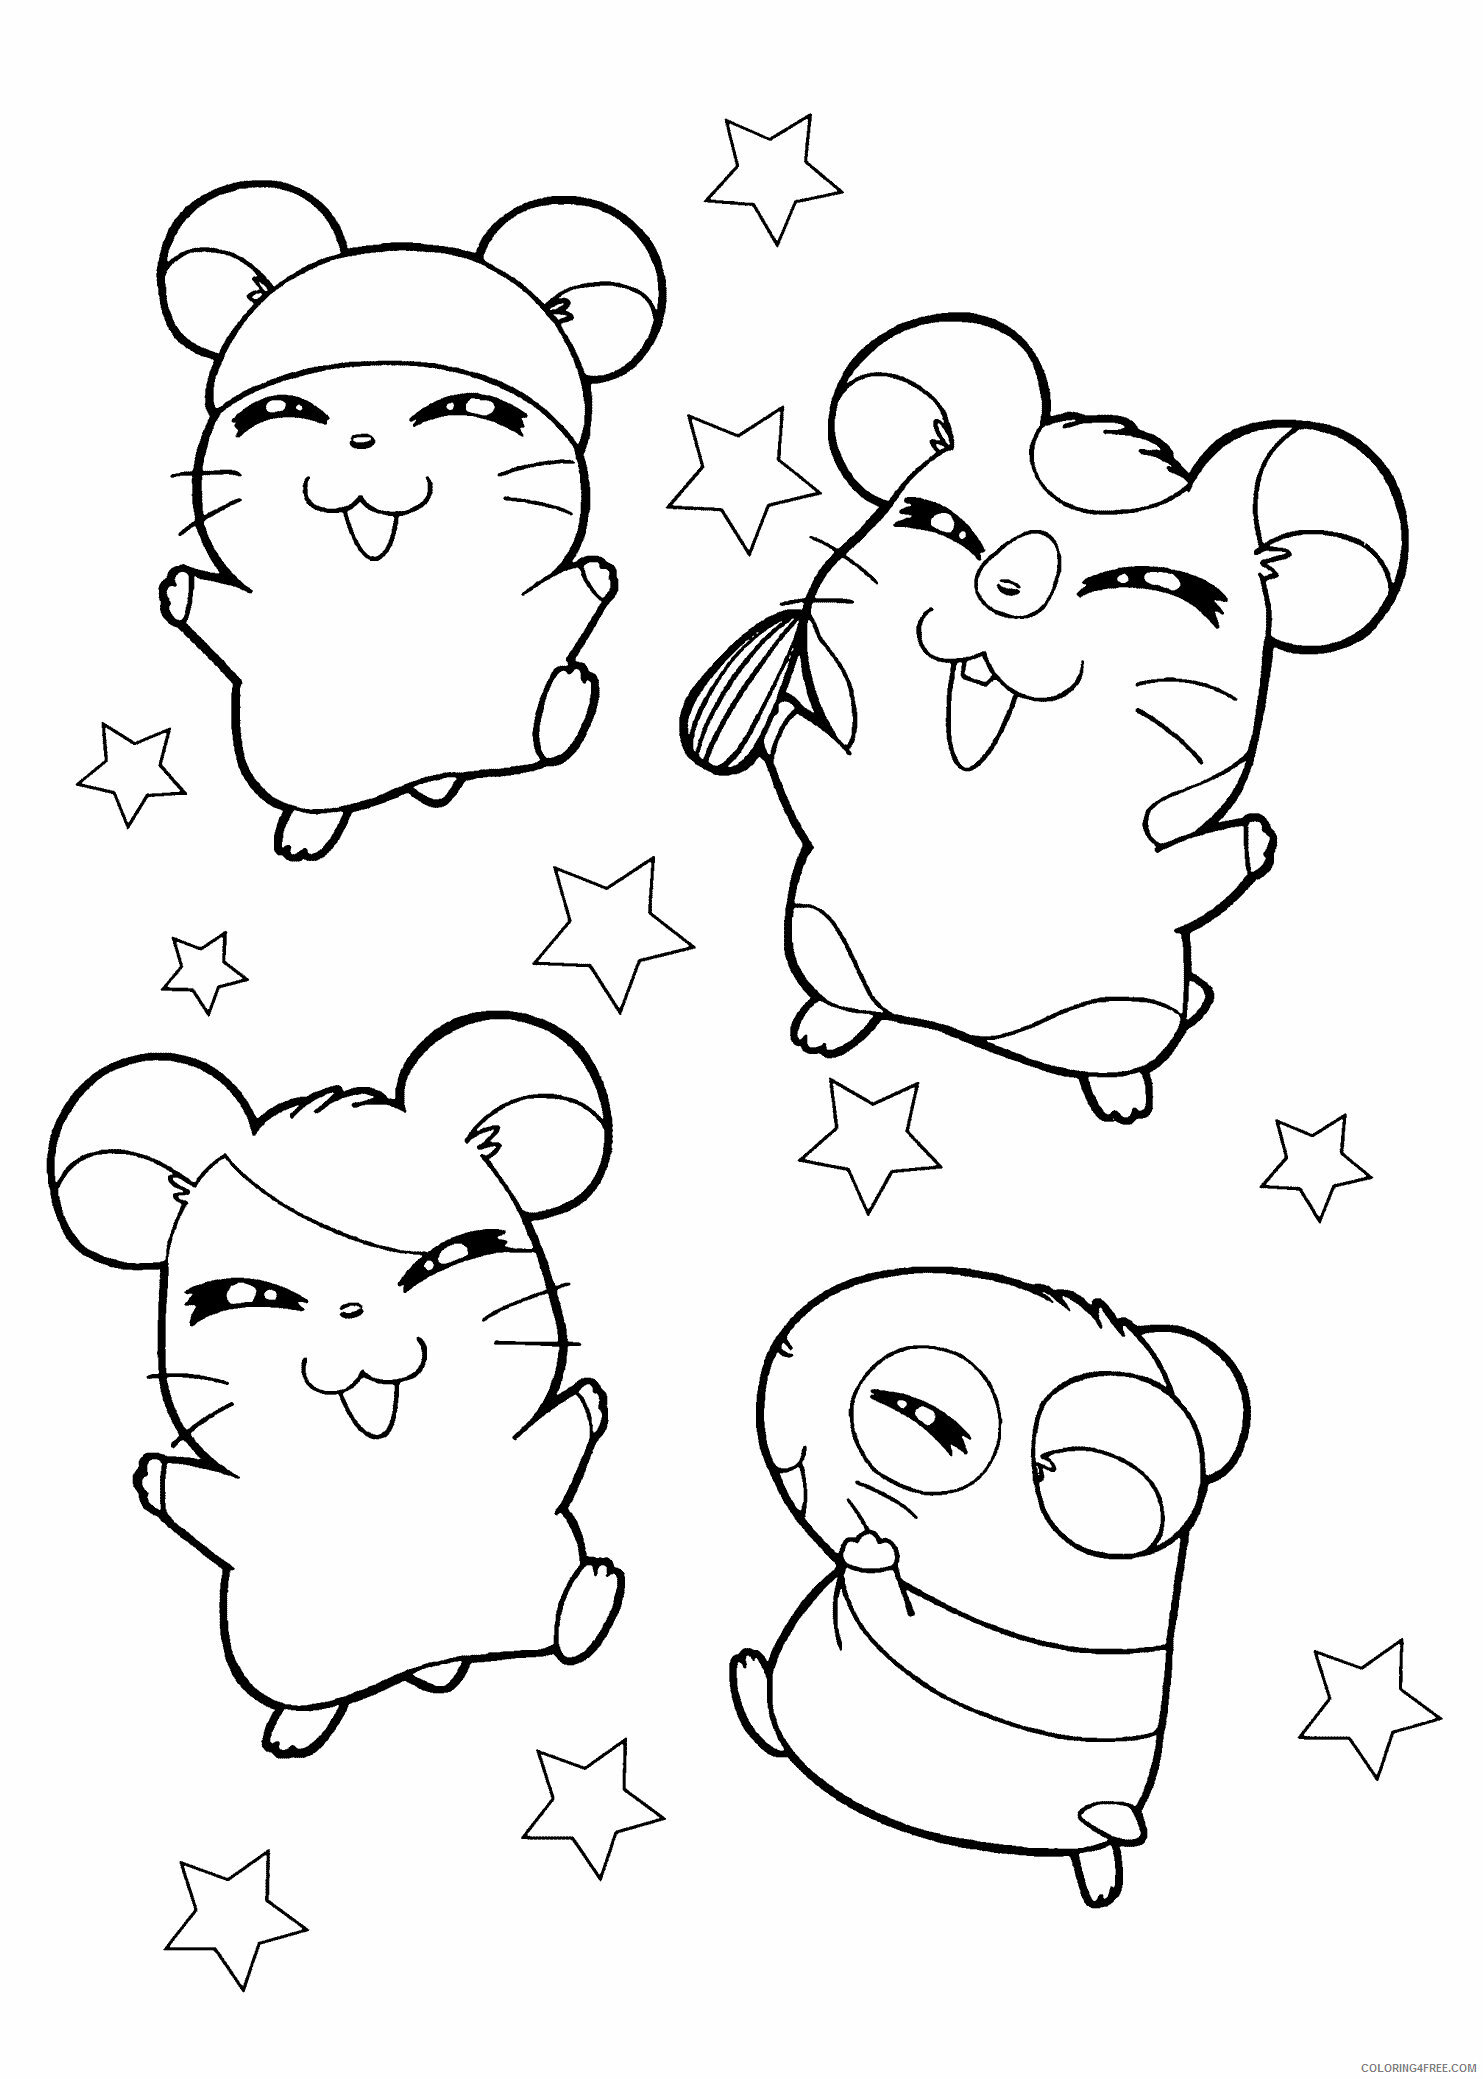 Hamster Coloring Pages Animal Printable Sheets Happy Hamsters 2021 2582 Coloring4free